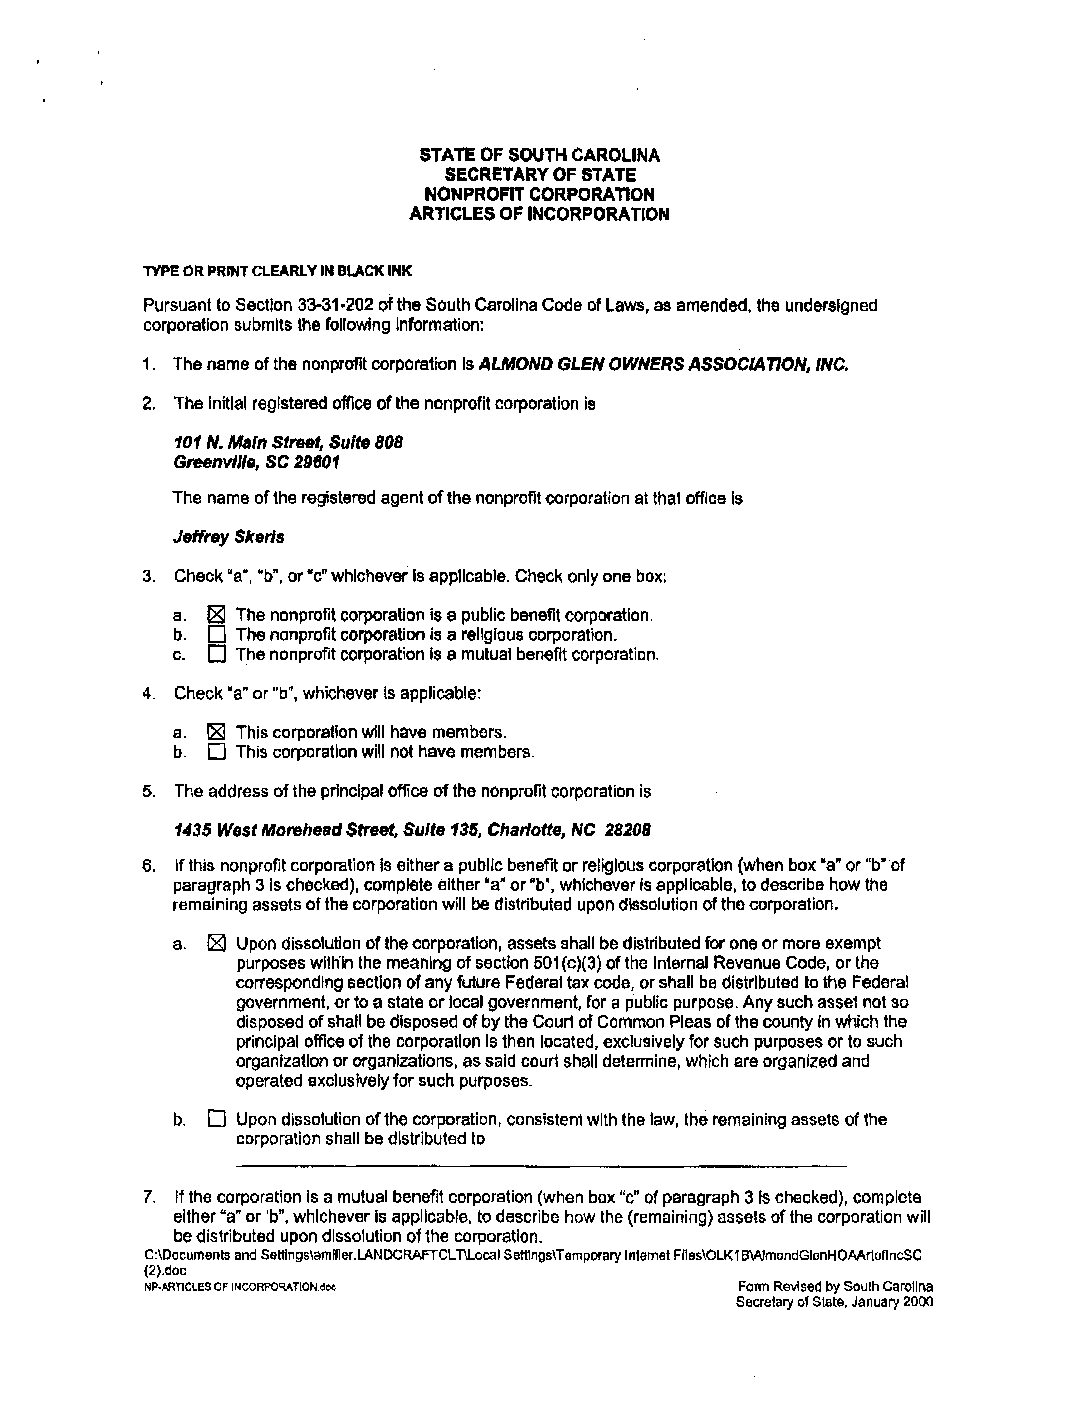 Almond Glen Articles of Incorporation